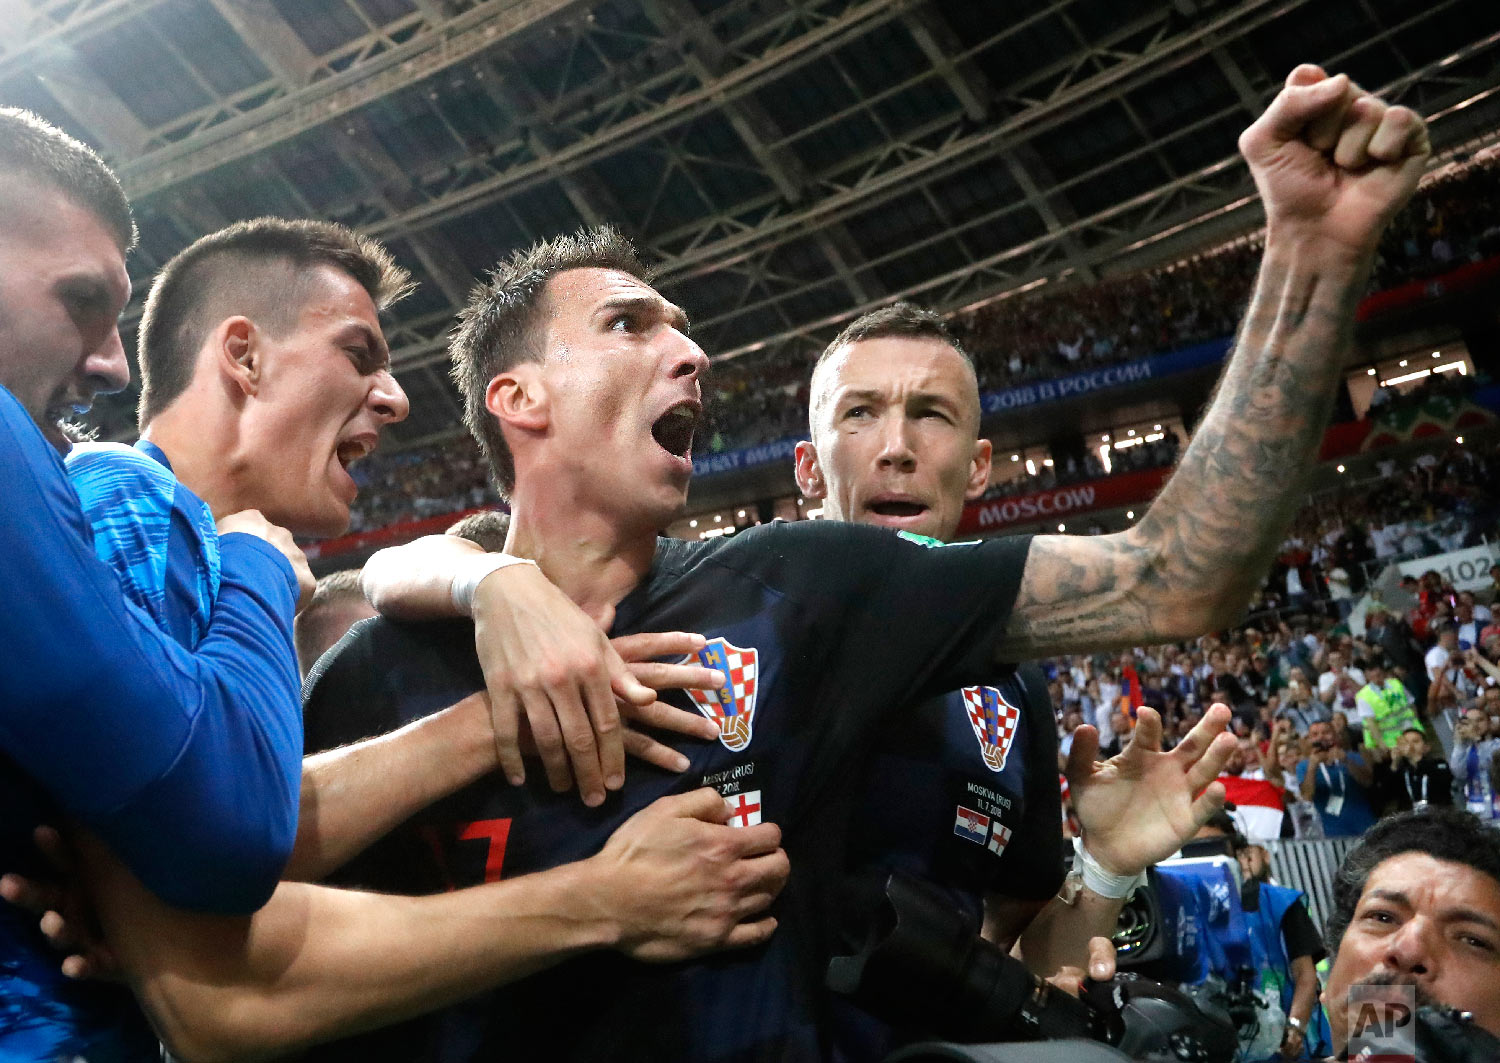  Croatia's Mario Mandzukic, center, celebrates after scoring his side's second goal during the semifinal match between Croatia and England at the 2018 soccer World Cup in the Luzhniki Stadium in Moscow, Russia, Wednesday, July 11, 2018. (AP Photo/Fra